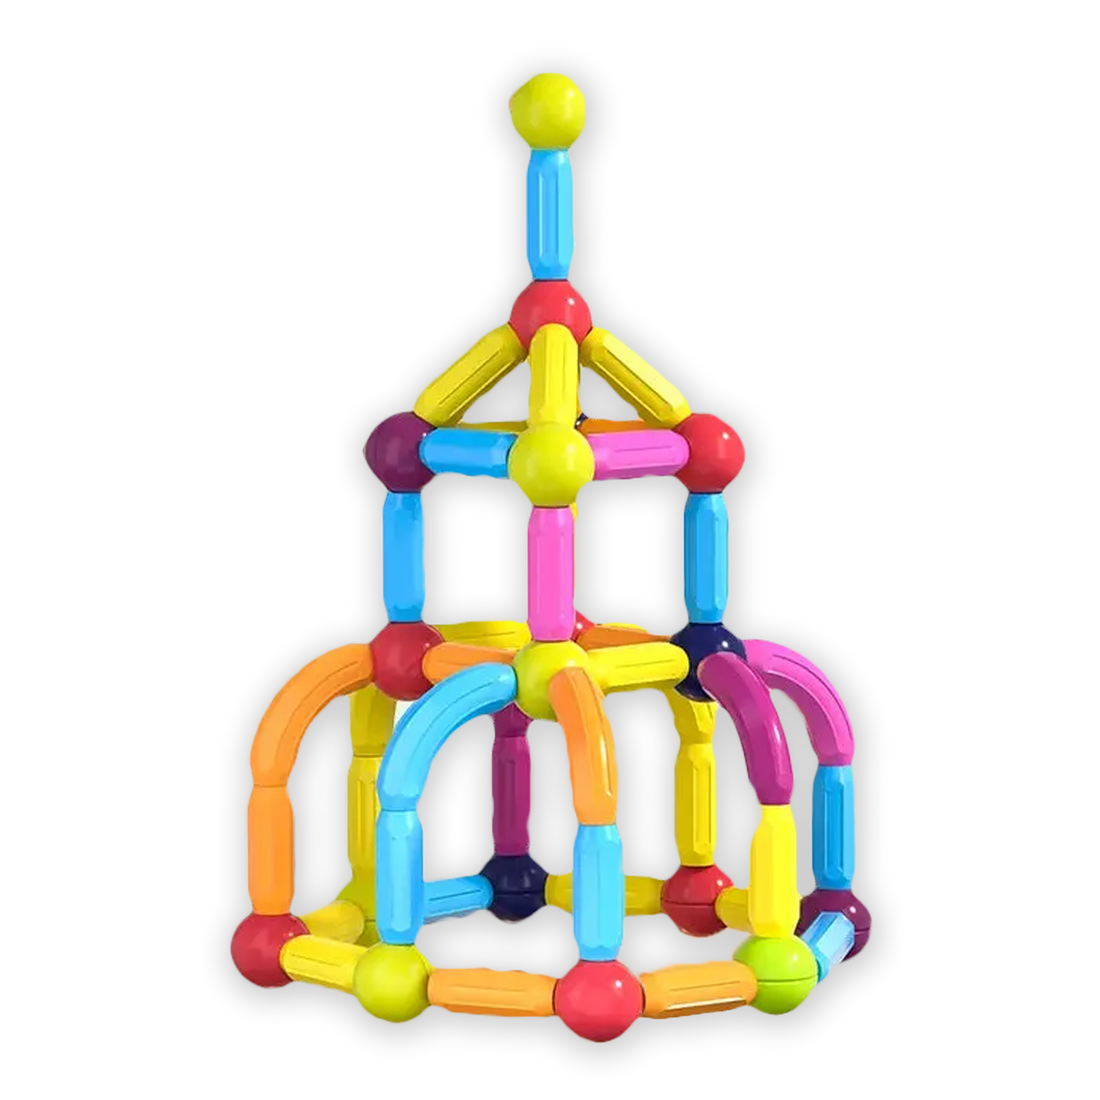 Colorful Soulful Trading Magnetic Sticks Building Blocks assembled into a geometric structure, featuring multi-colored sticks connected by balls, isolated on a black background.